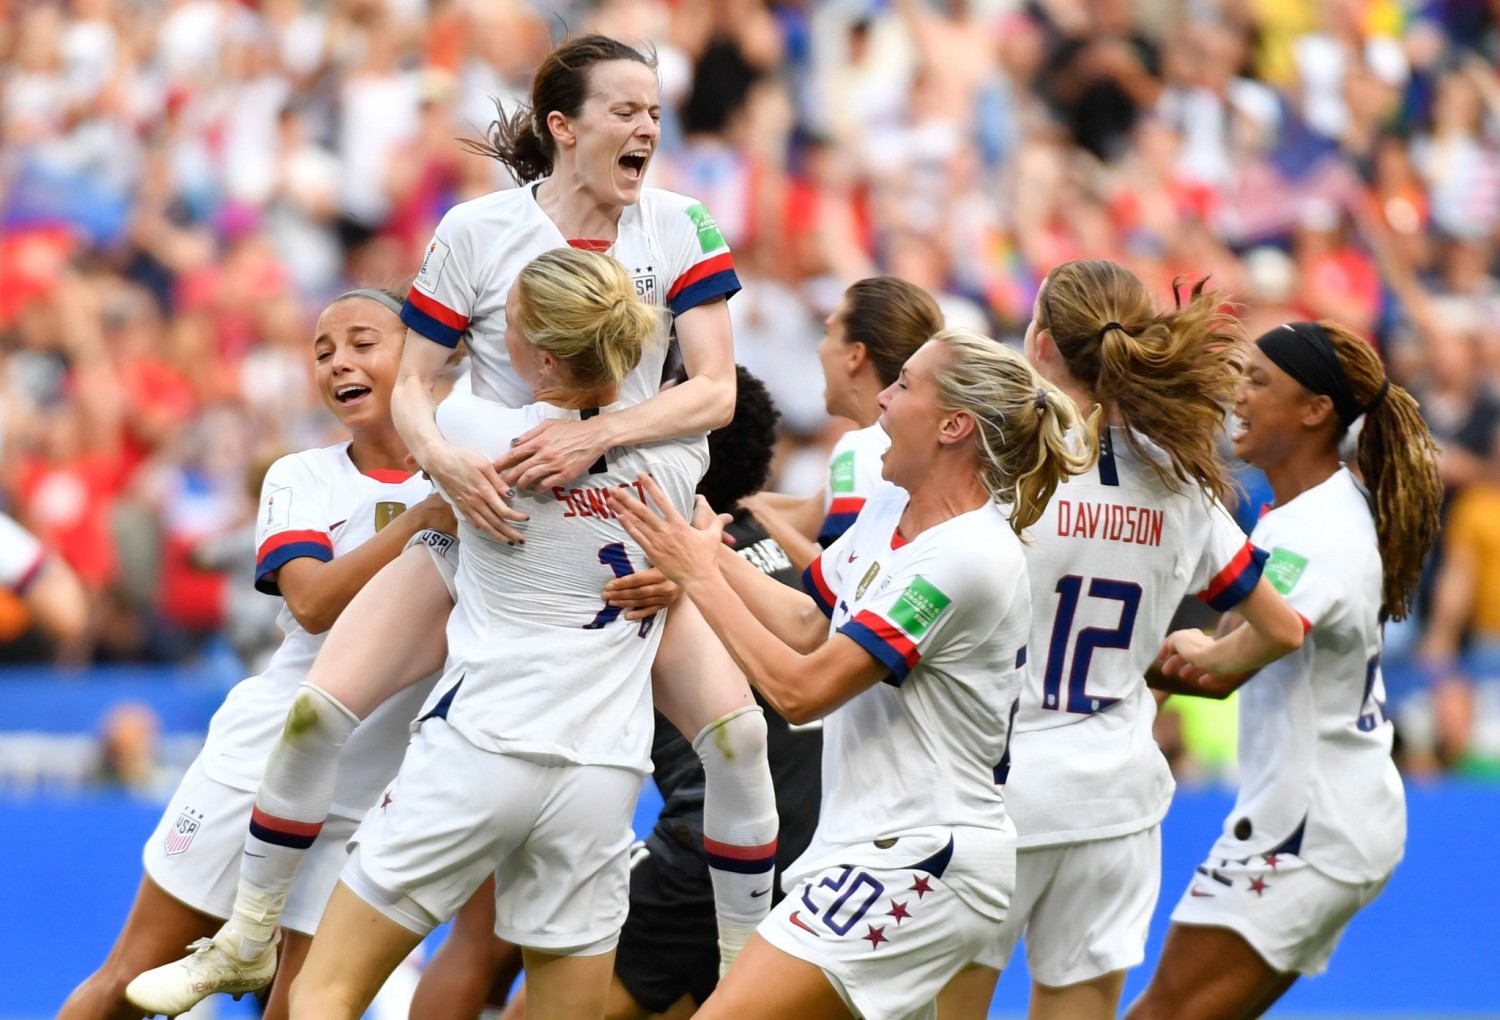 The United States celebrating after defeating the Netherlands, 2-0, to win the Women’s World Cup.CreditCreditPhilippe Desmazes/Agence France-Presse — Getty Images